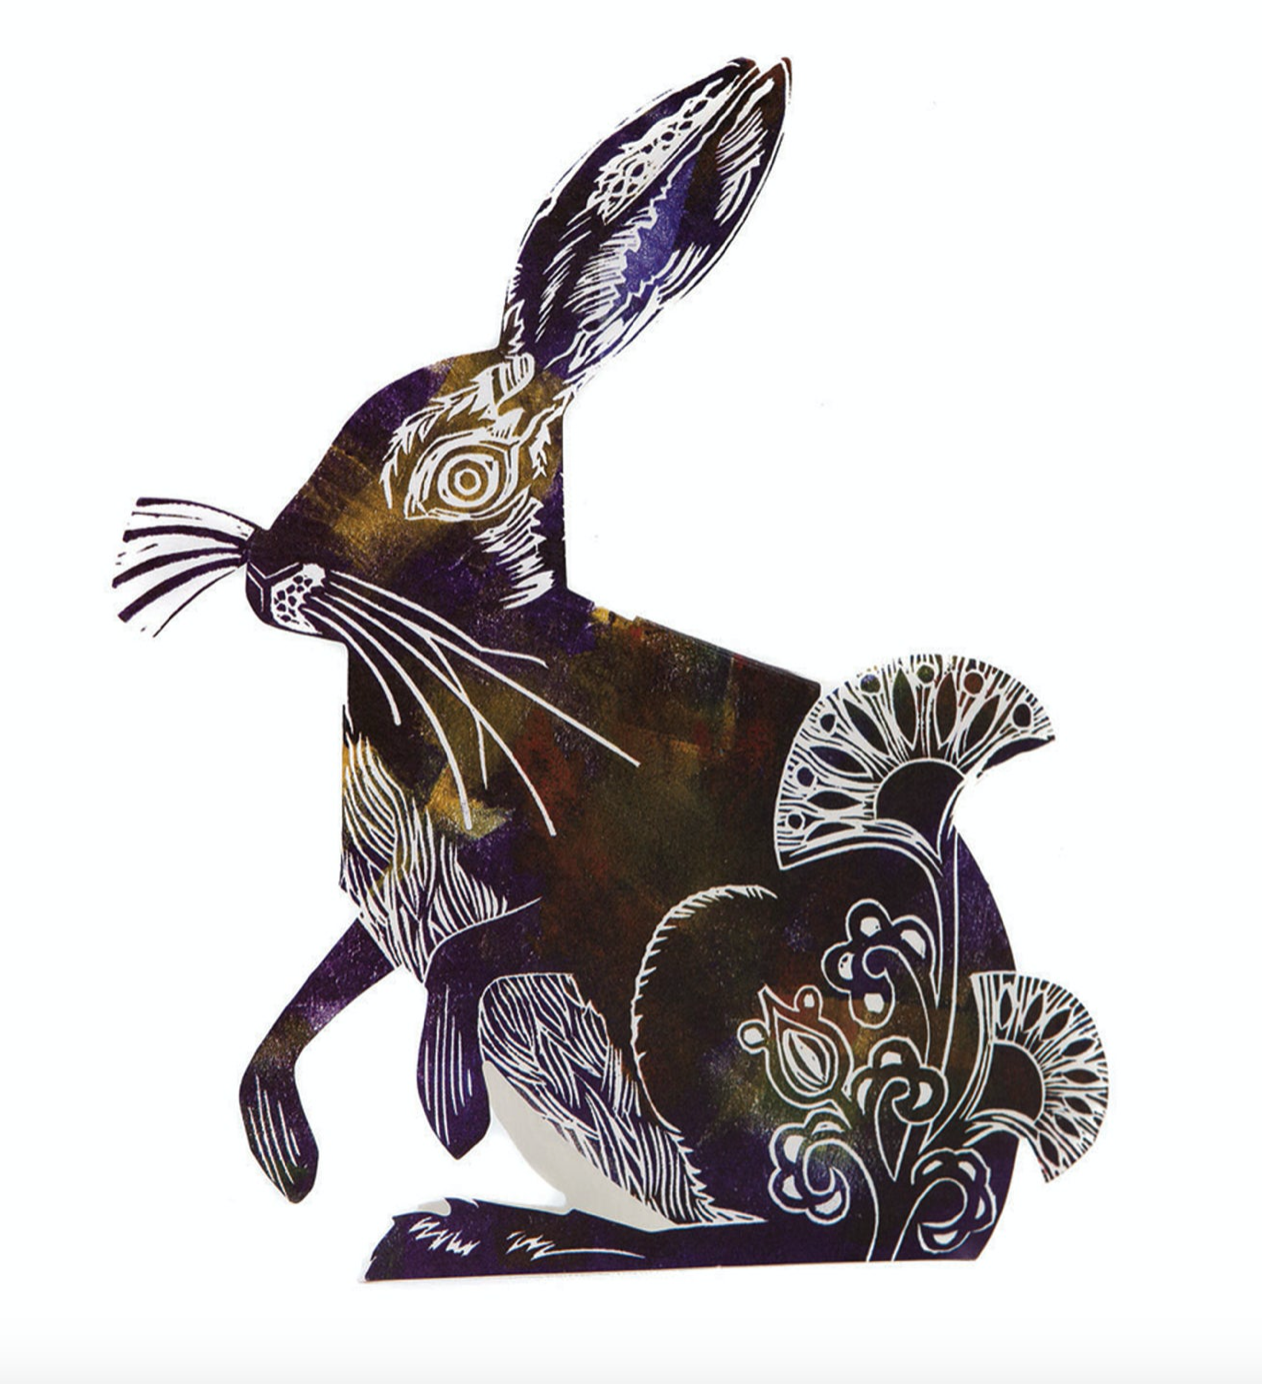 3D Hare by Printmaker Judy Lumley